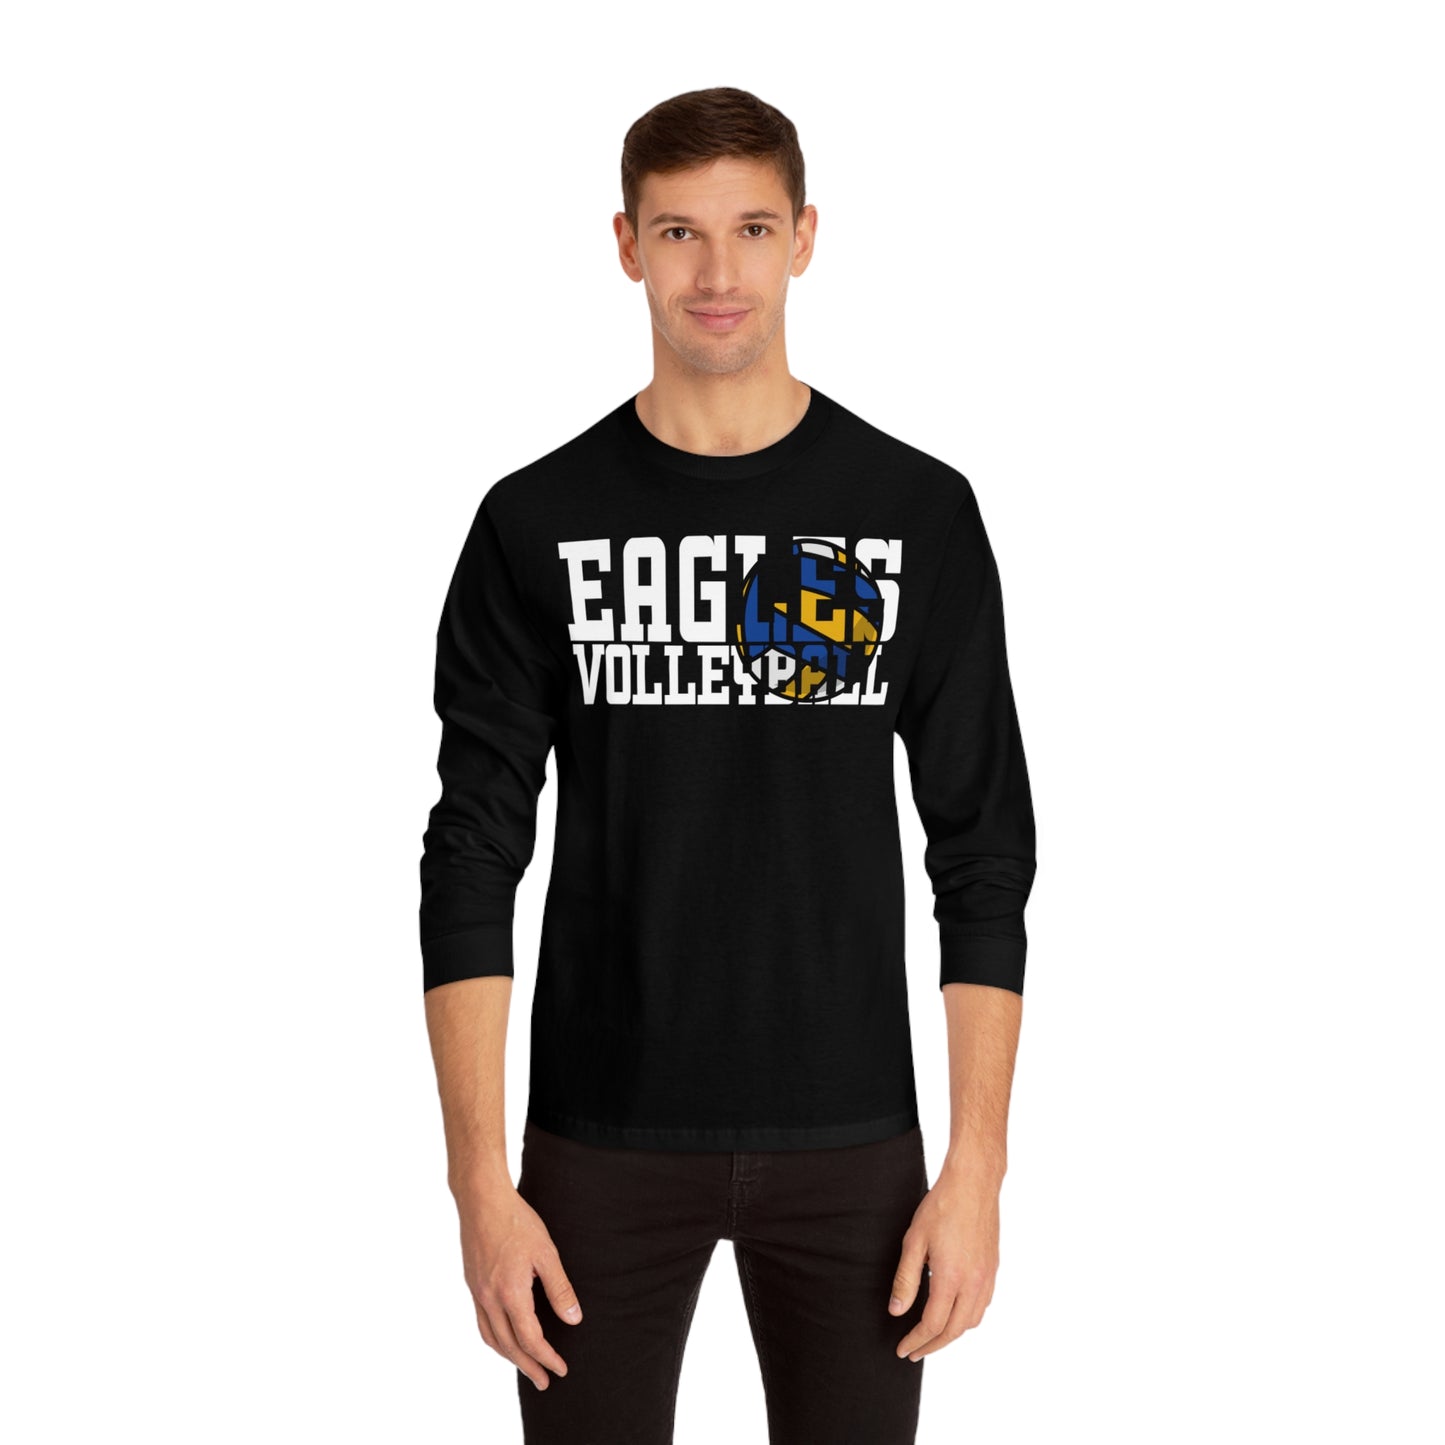 Volleyball Cutout - American Apparel Unisex Classic Long Sleeve T-Shirt